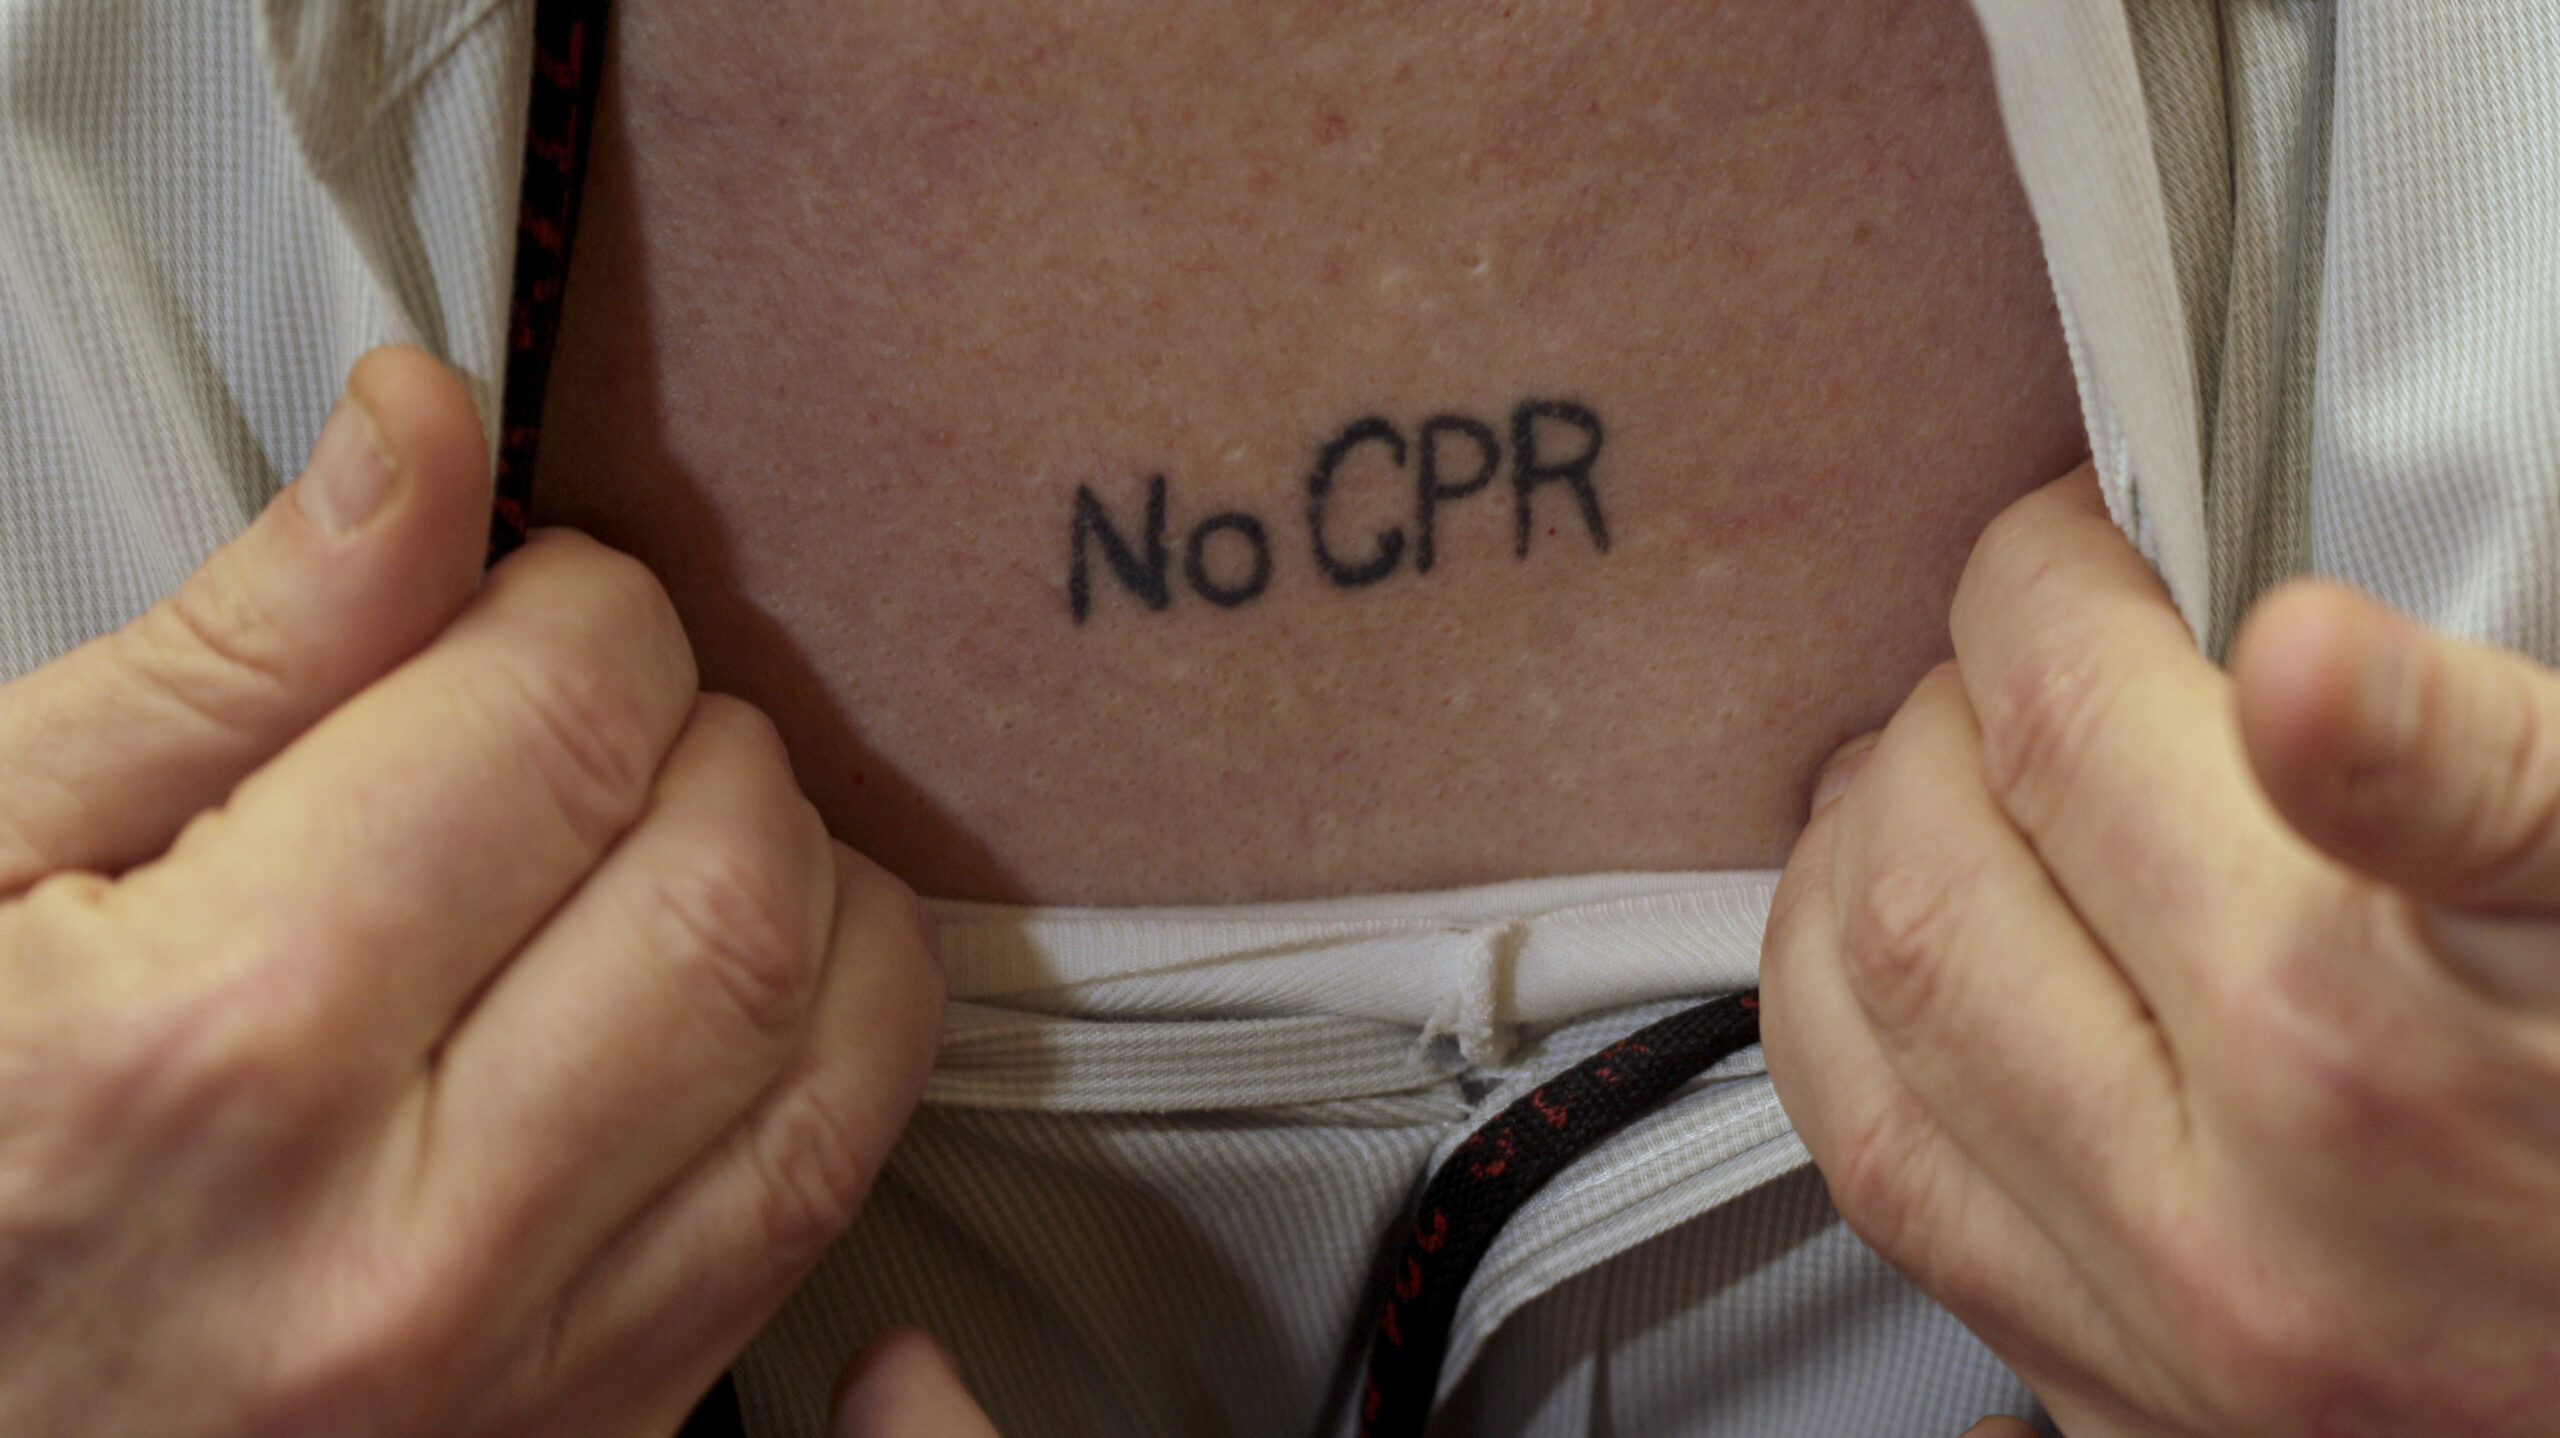 Some people have their medical wished tattooed on their bodies. CPR can save lives, especially for the young and healthy